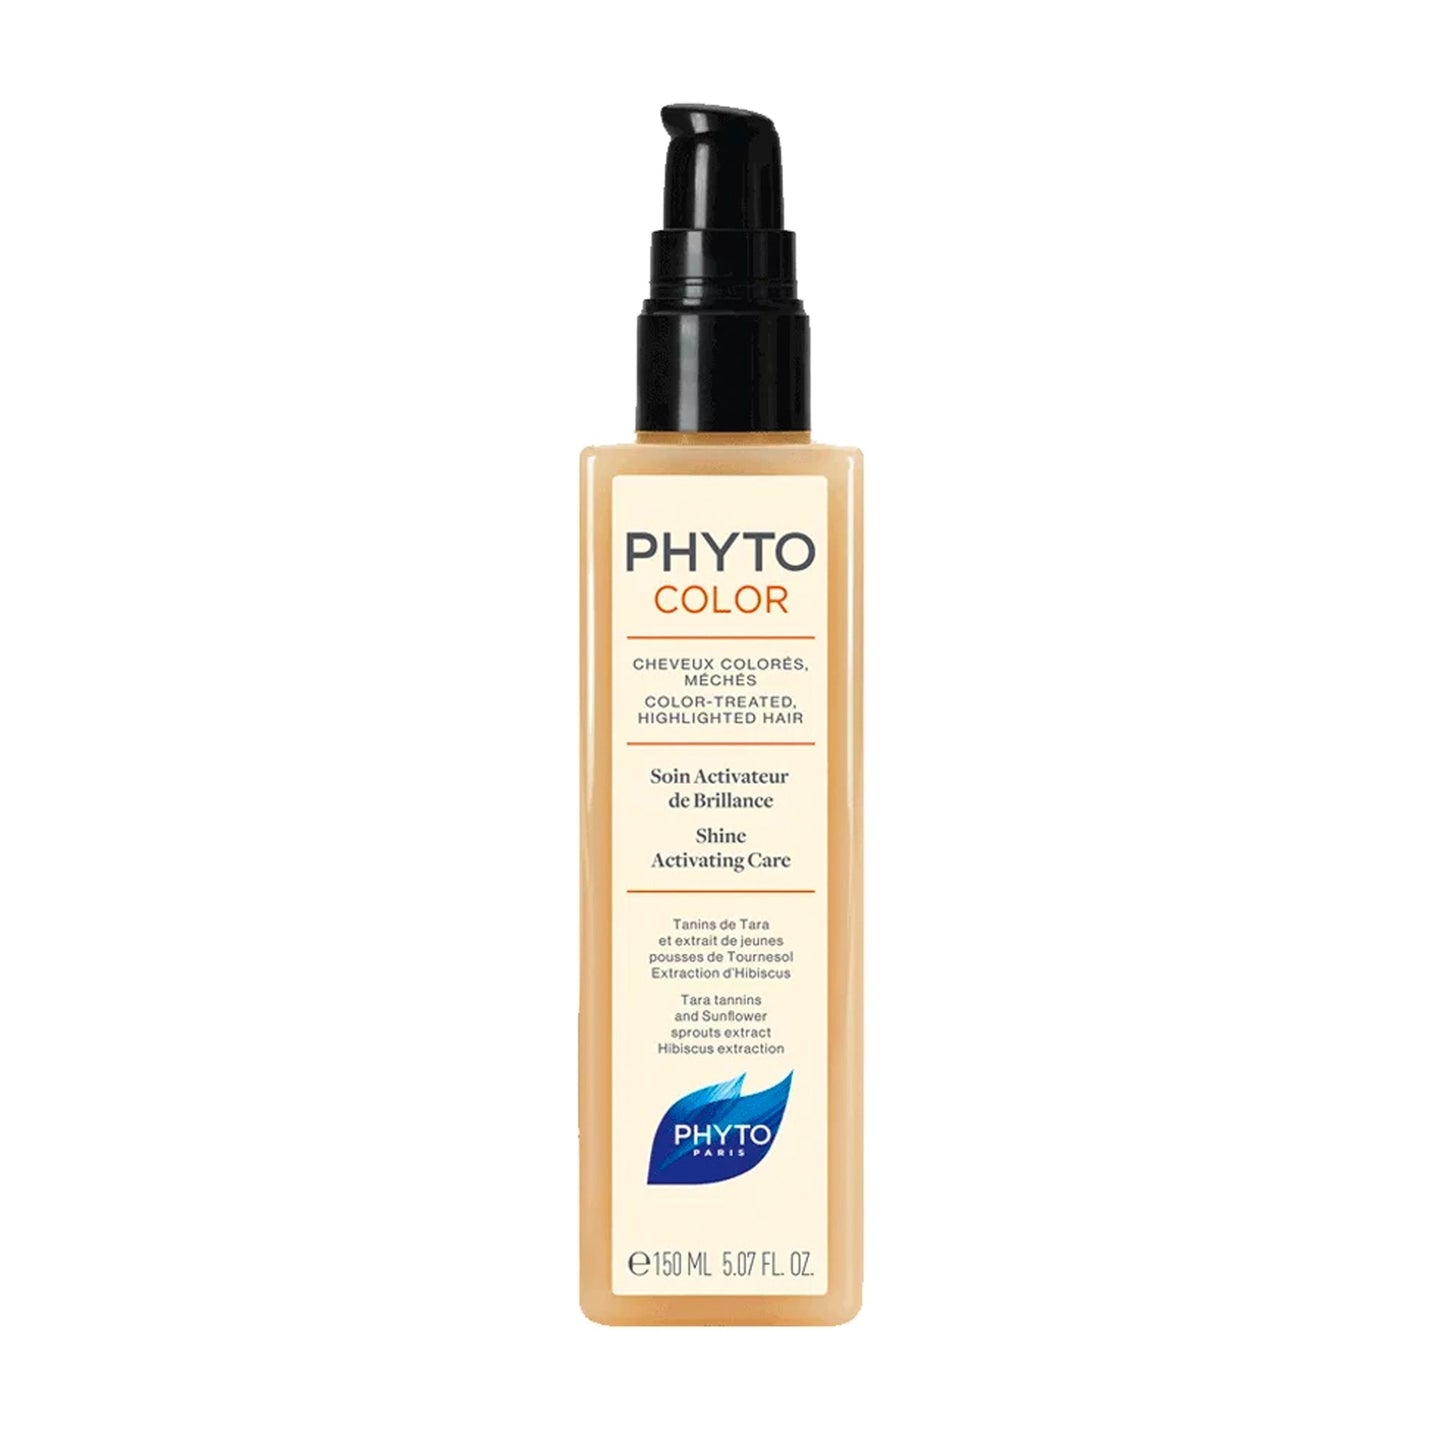 PHYTOCOLOR Shine Activating Care-Gel 5.07 oz